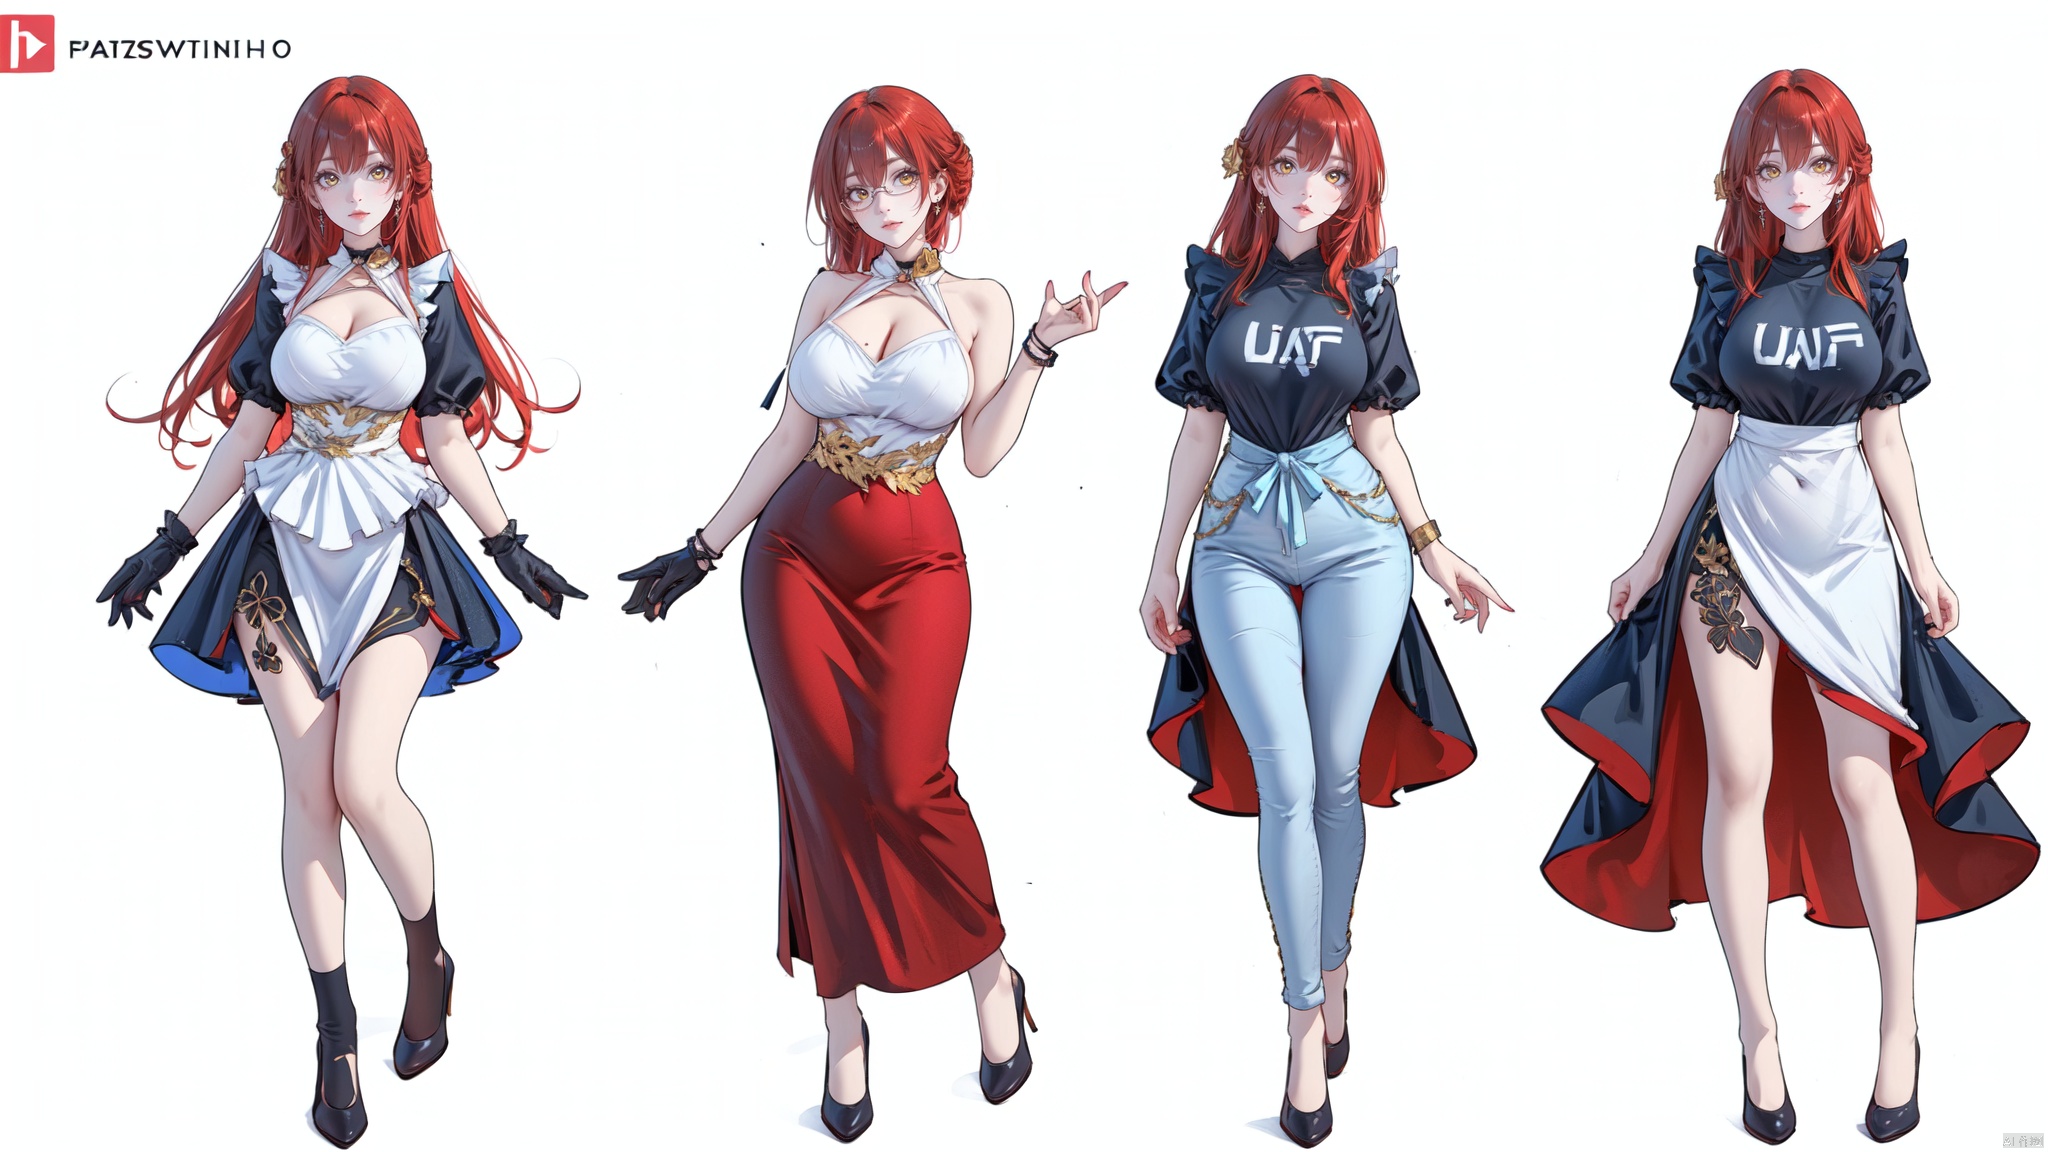  8k, best quality, masterpiece, (ultra-detailed:1.1), (high detailed skin),
(full body:1.3),
////////////////////////
jizi,1girl,red hair,yellow eyes,long hair,bangs,breasts,
///////////////////////////////
clothesviews,Differentclothes,Dress-updisplay,multipleviews,maid,t-shirt,blue_jeans,glasses,bunny_suit ,sports_uniform,nurse,white background, simple background,
\\\\\\\\\\\\\\\\\\\\\\
(beautiful_face), ((intricate_detail)), clear face,
((finely_detailed)), fine_fabric_emphasis,
((glossy)), full_shot, Anime, melowh, Art style, fantasy